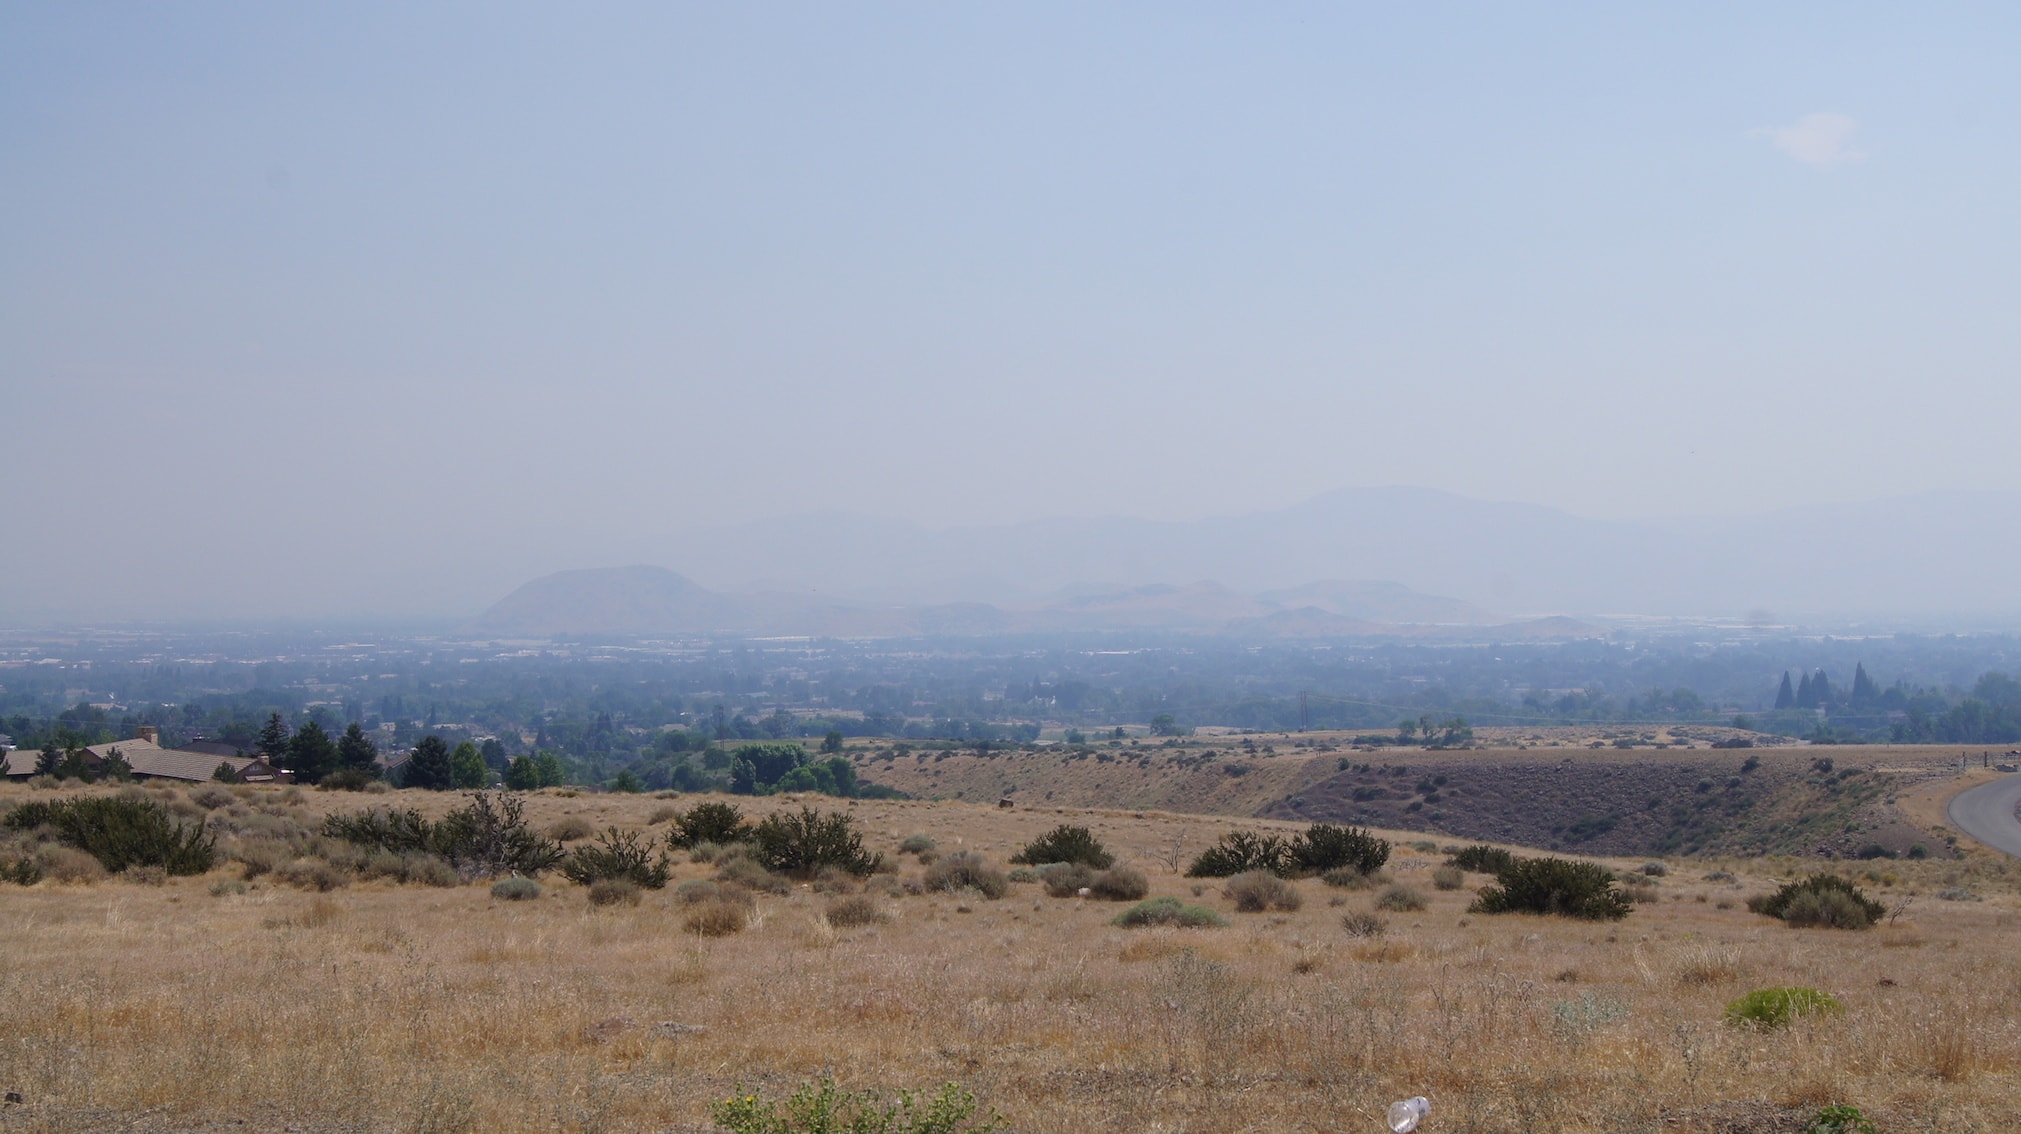 A view of the plains with foggy mountains in the background